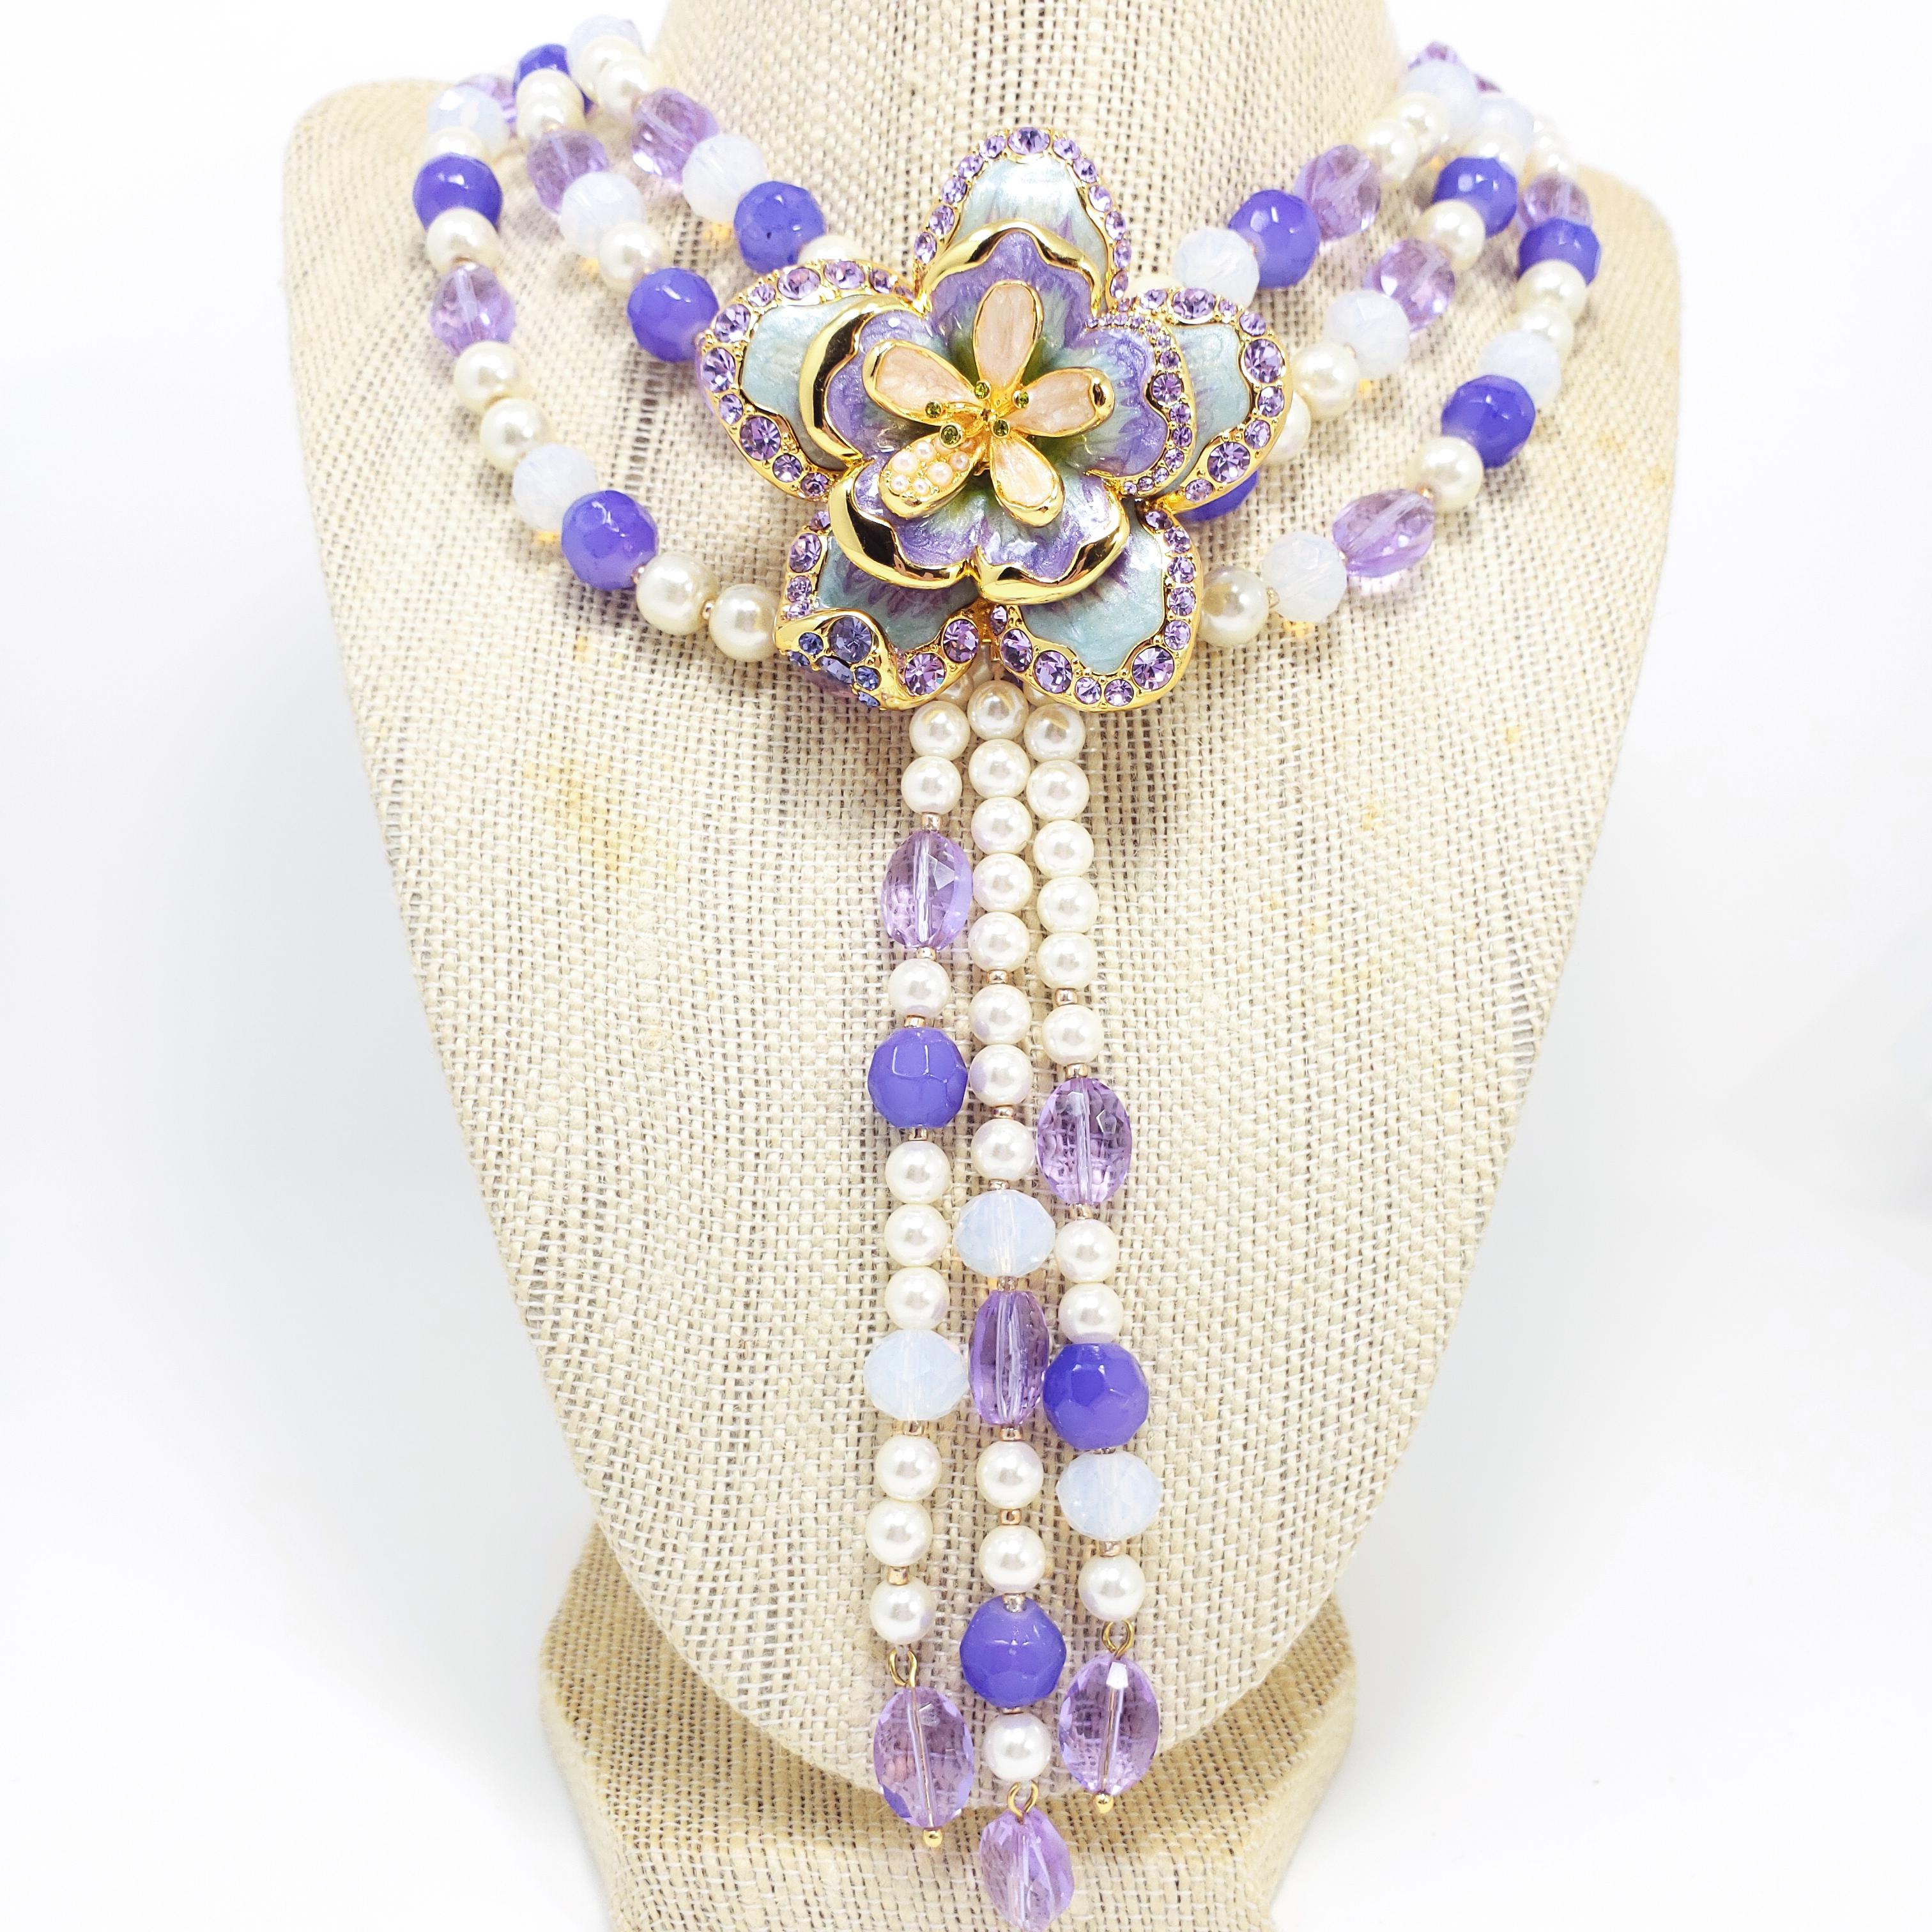 A triple-strand necklace featuring simulated pearls and faceted crystals in blue and lavender tones. Features a removable flower pendant, decorated with enamel, crystals, and simulated pearls on three dangling strands.

Jay by Jay Strongwater line,